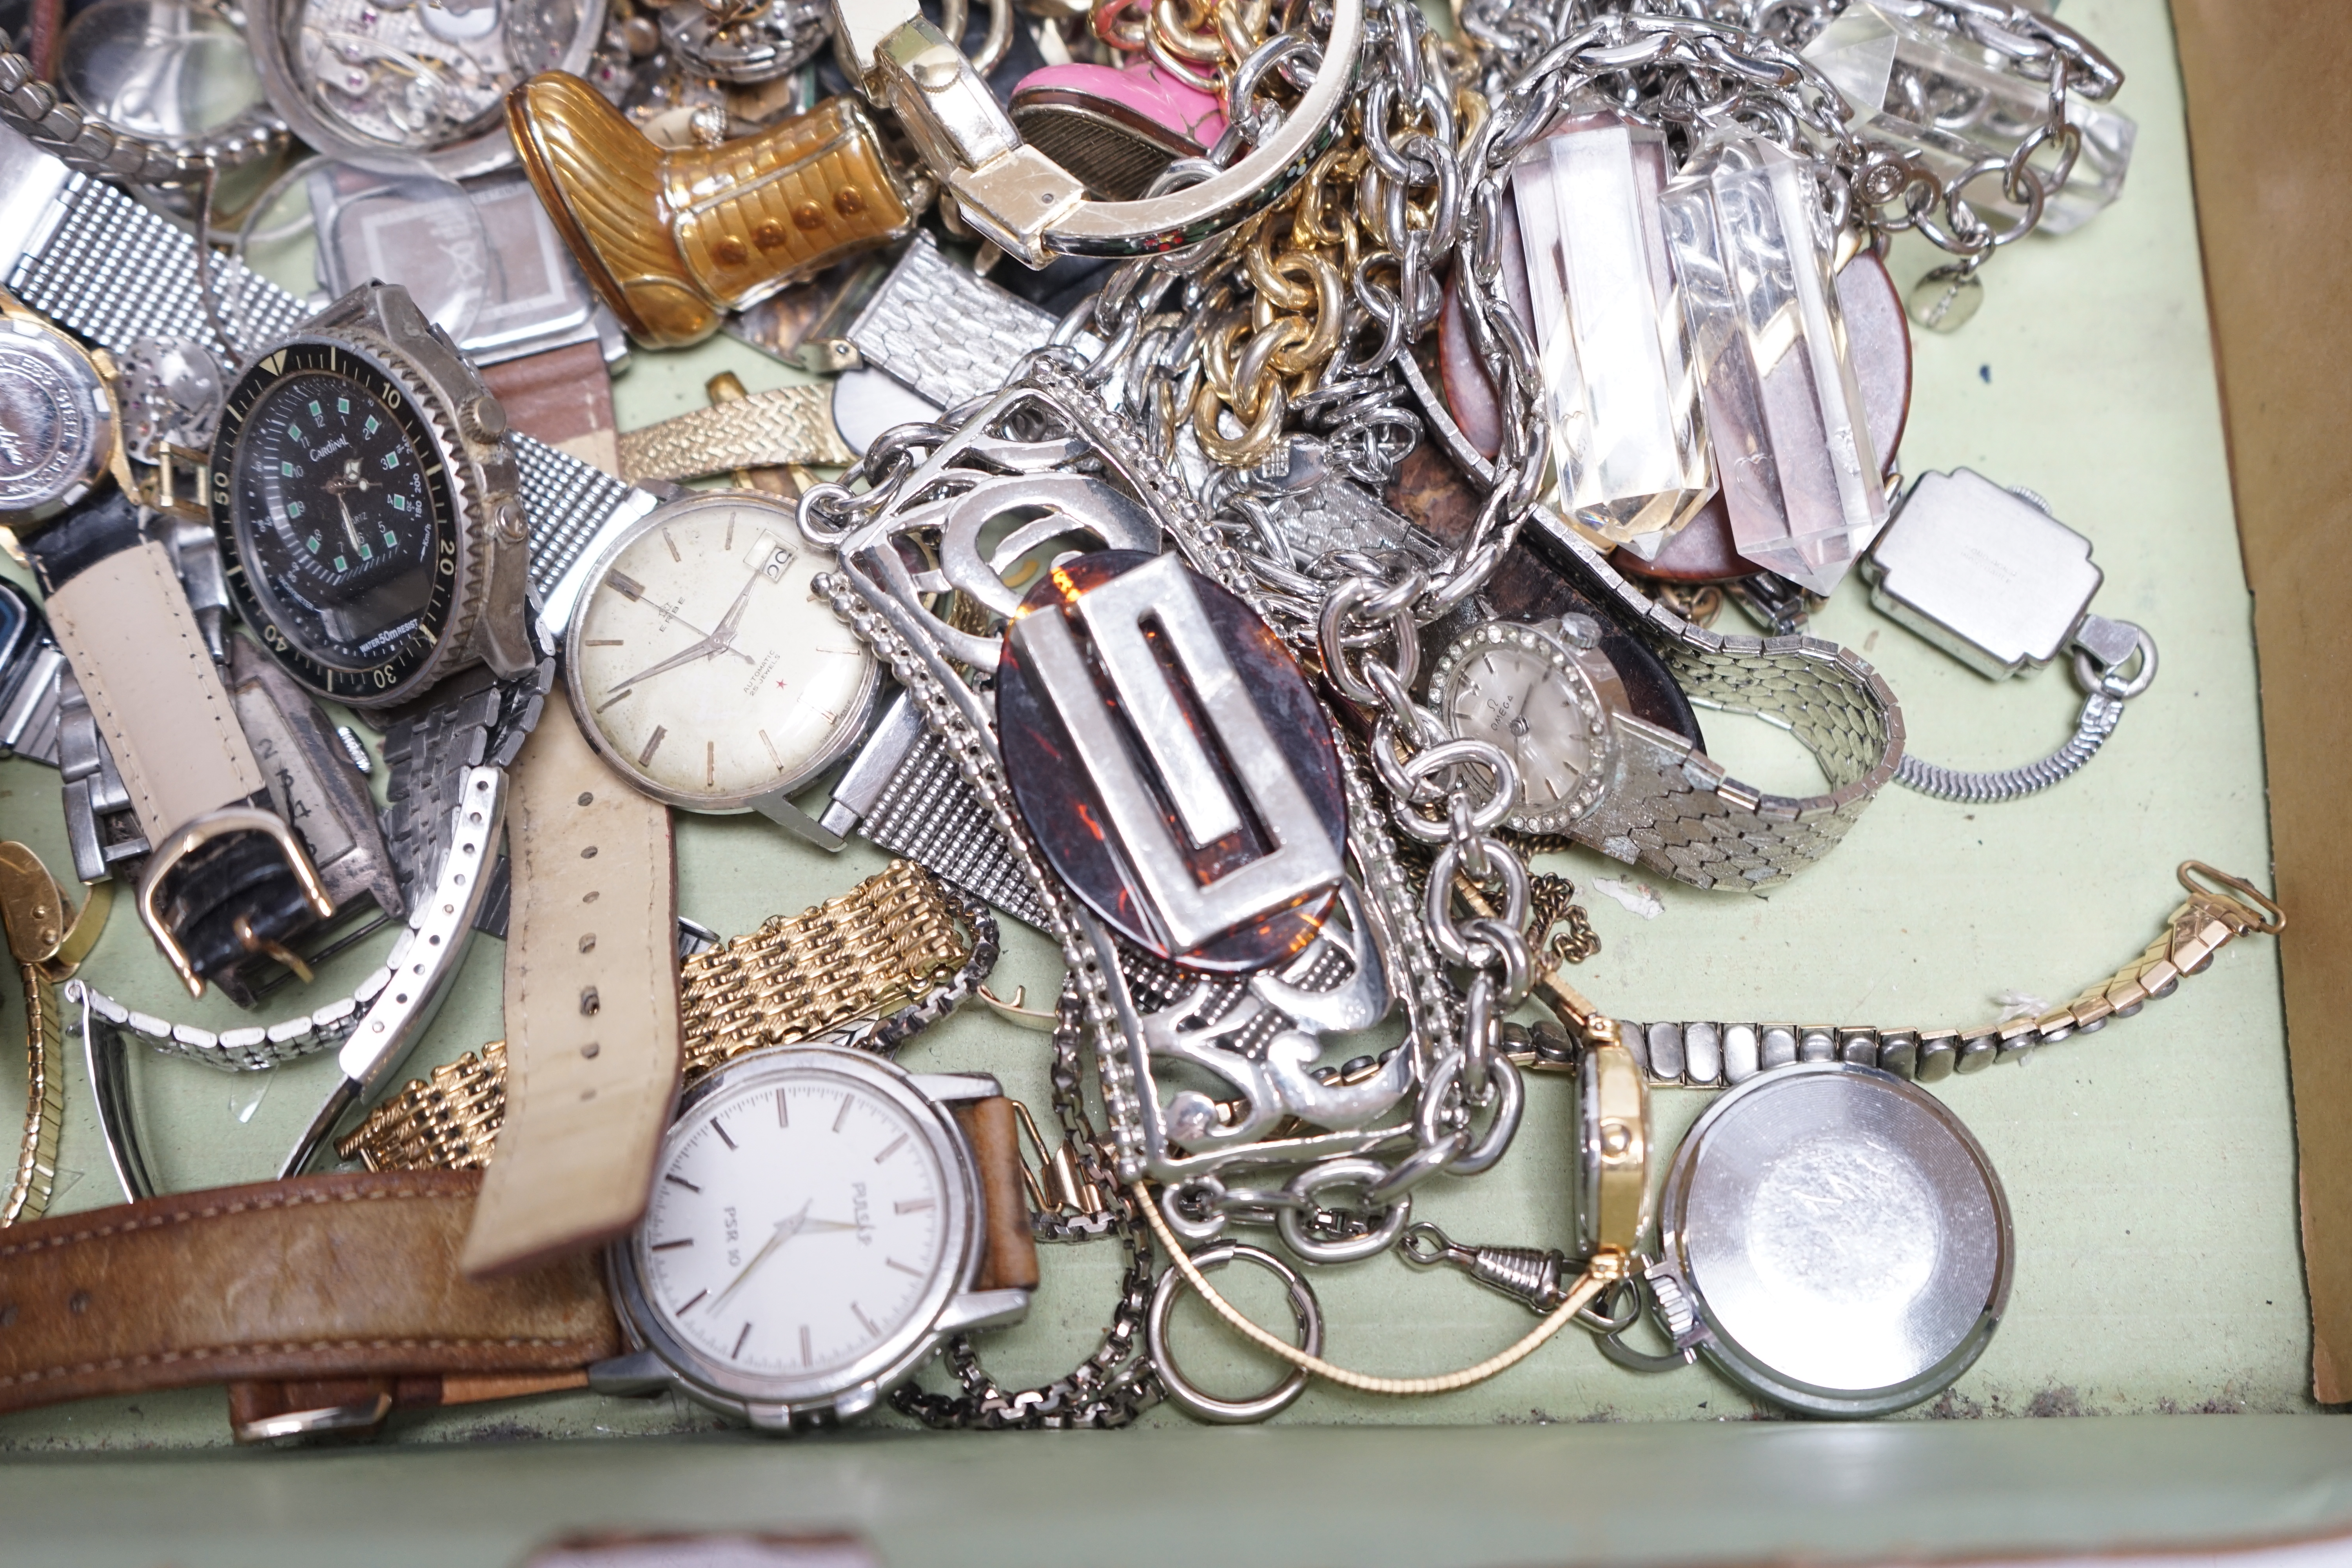 A small collection of assorted lady's and gentleman's wrist watches including Seiko, Erbe and Timex, a pocket watch and assorted costume jewellery including Givenchy. Condition - poor